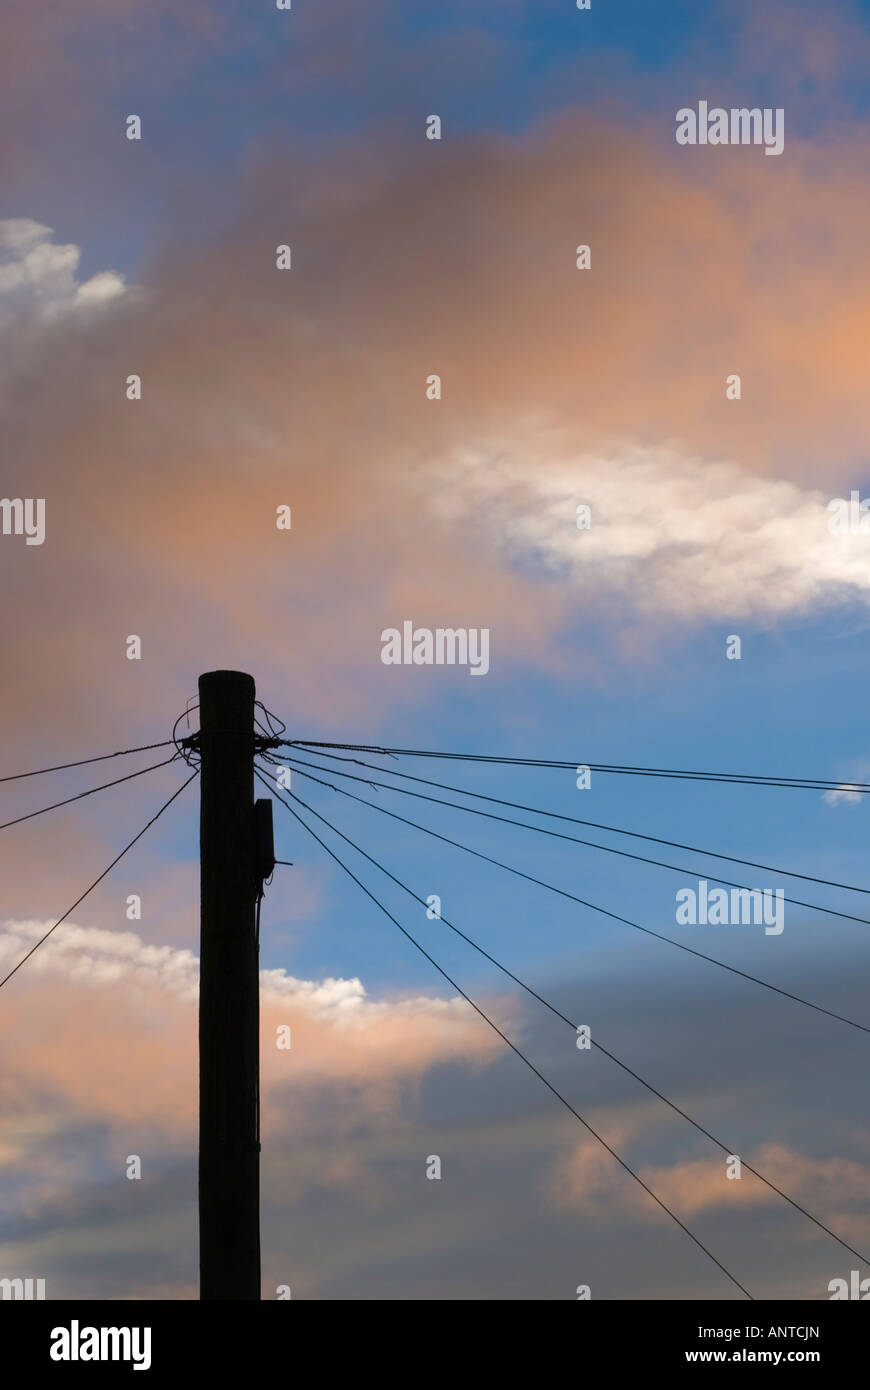 Telephone cables and telegraph pole silhouetted against a blue sky and jet trails Stock Photo